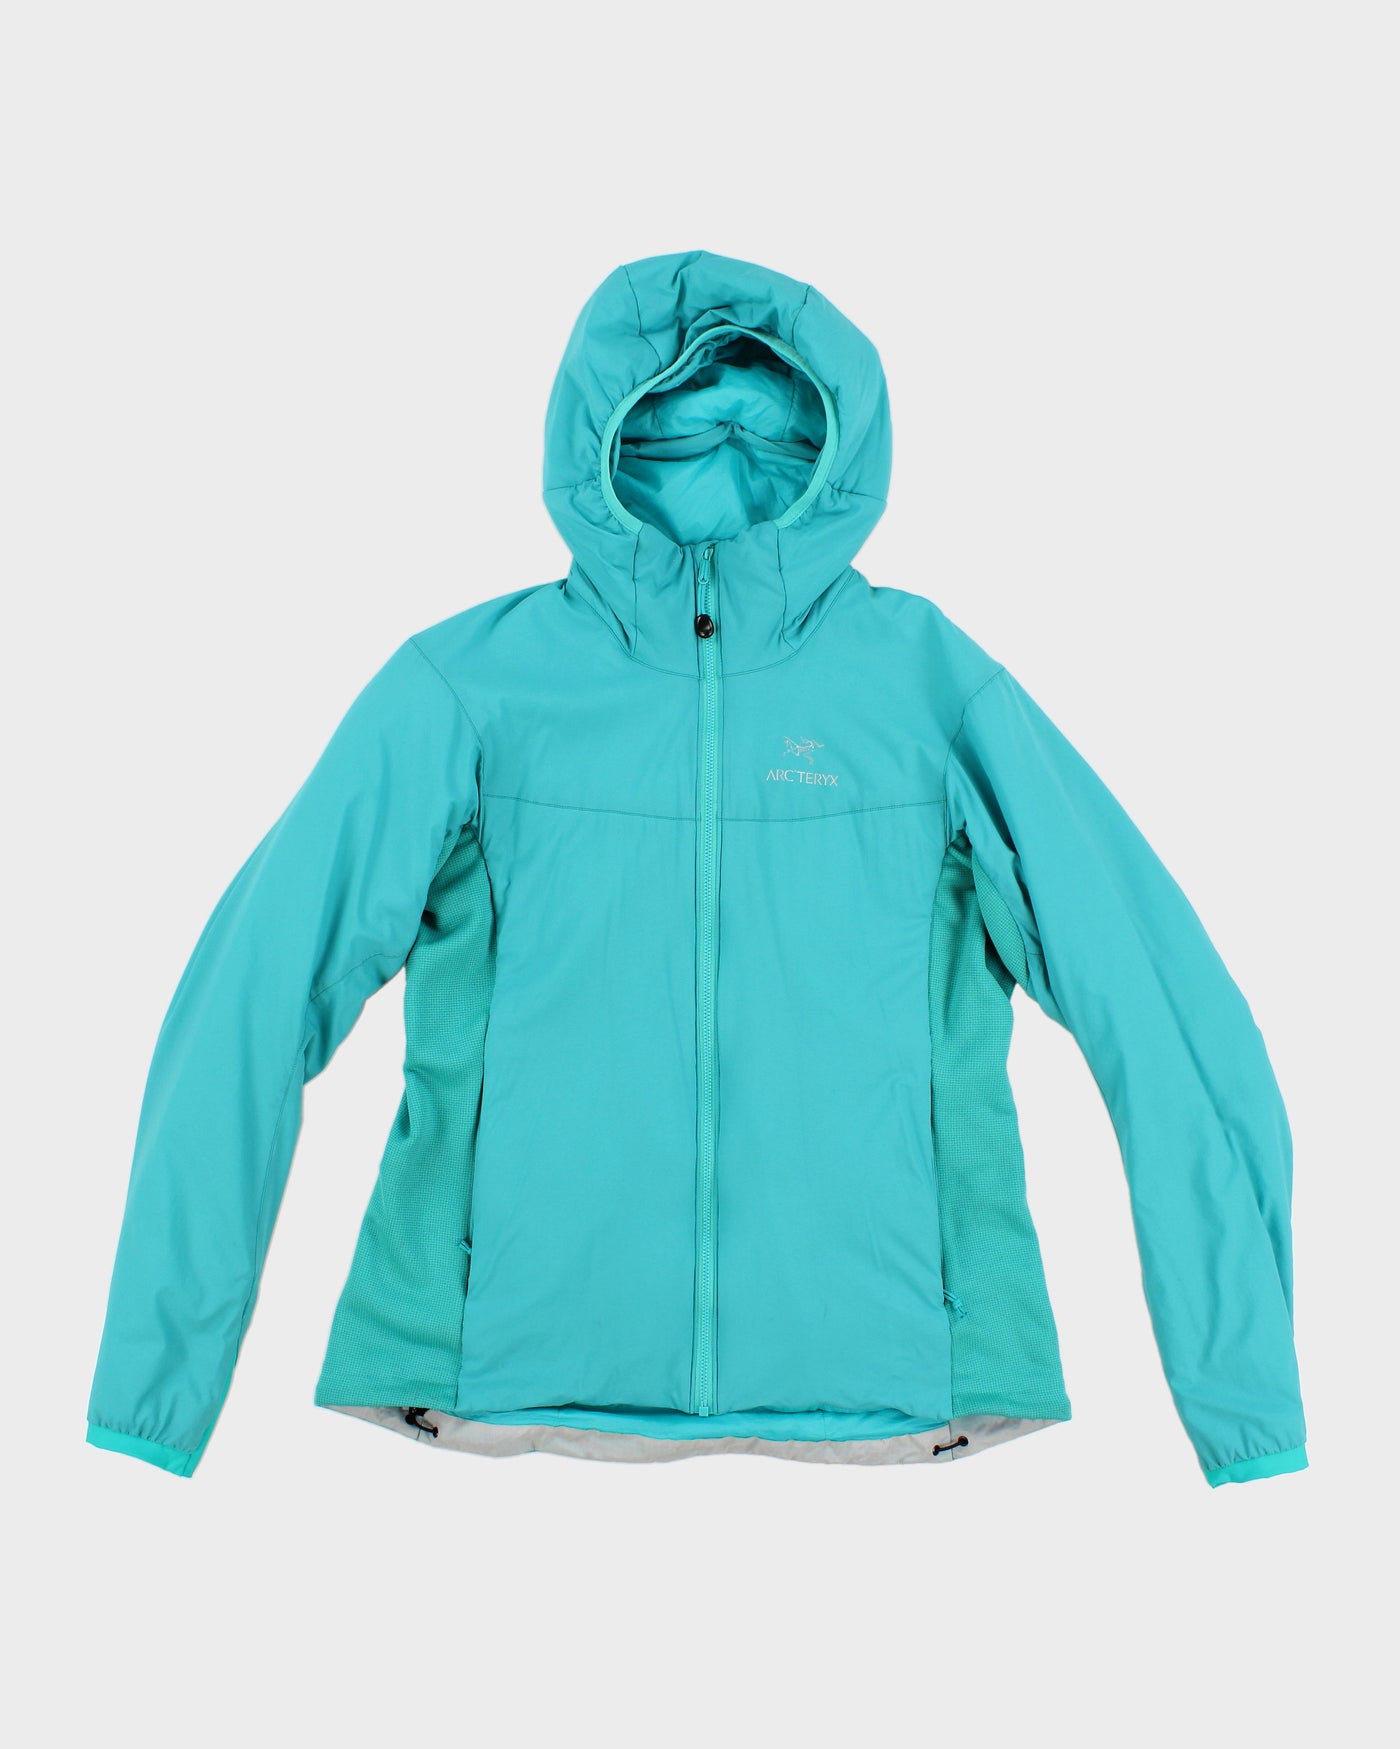 Womens Turquoise Arc'teryx Hooded Winter Jacket - L